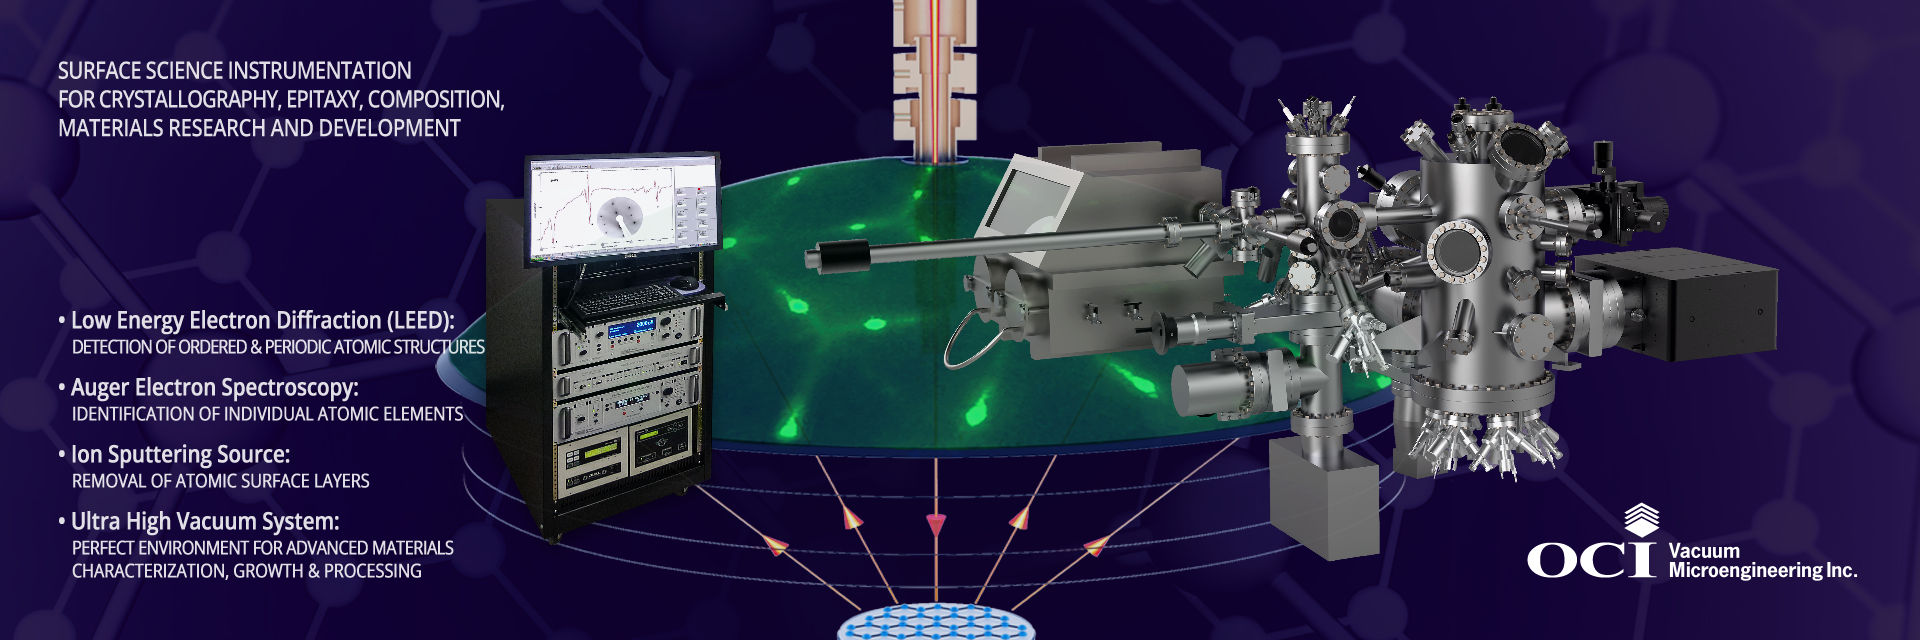 Sharp diffraction patterns - Low Energy Electron Diffraction (LEED). Identification of elements on surface - Auger Electron Spectroscopy (AES). Ion cleaning of surfaces - Ion Sputtering. UHV Systems - Ultra High Vacuum Systems. OCI Vacuum Microengineering Inc. UHV System with worldwide map in the background. Header image.